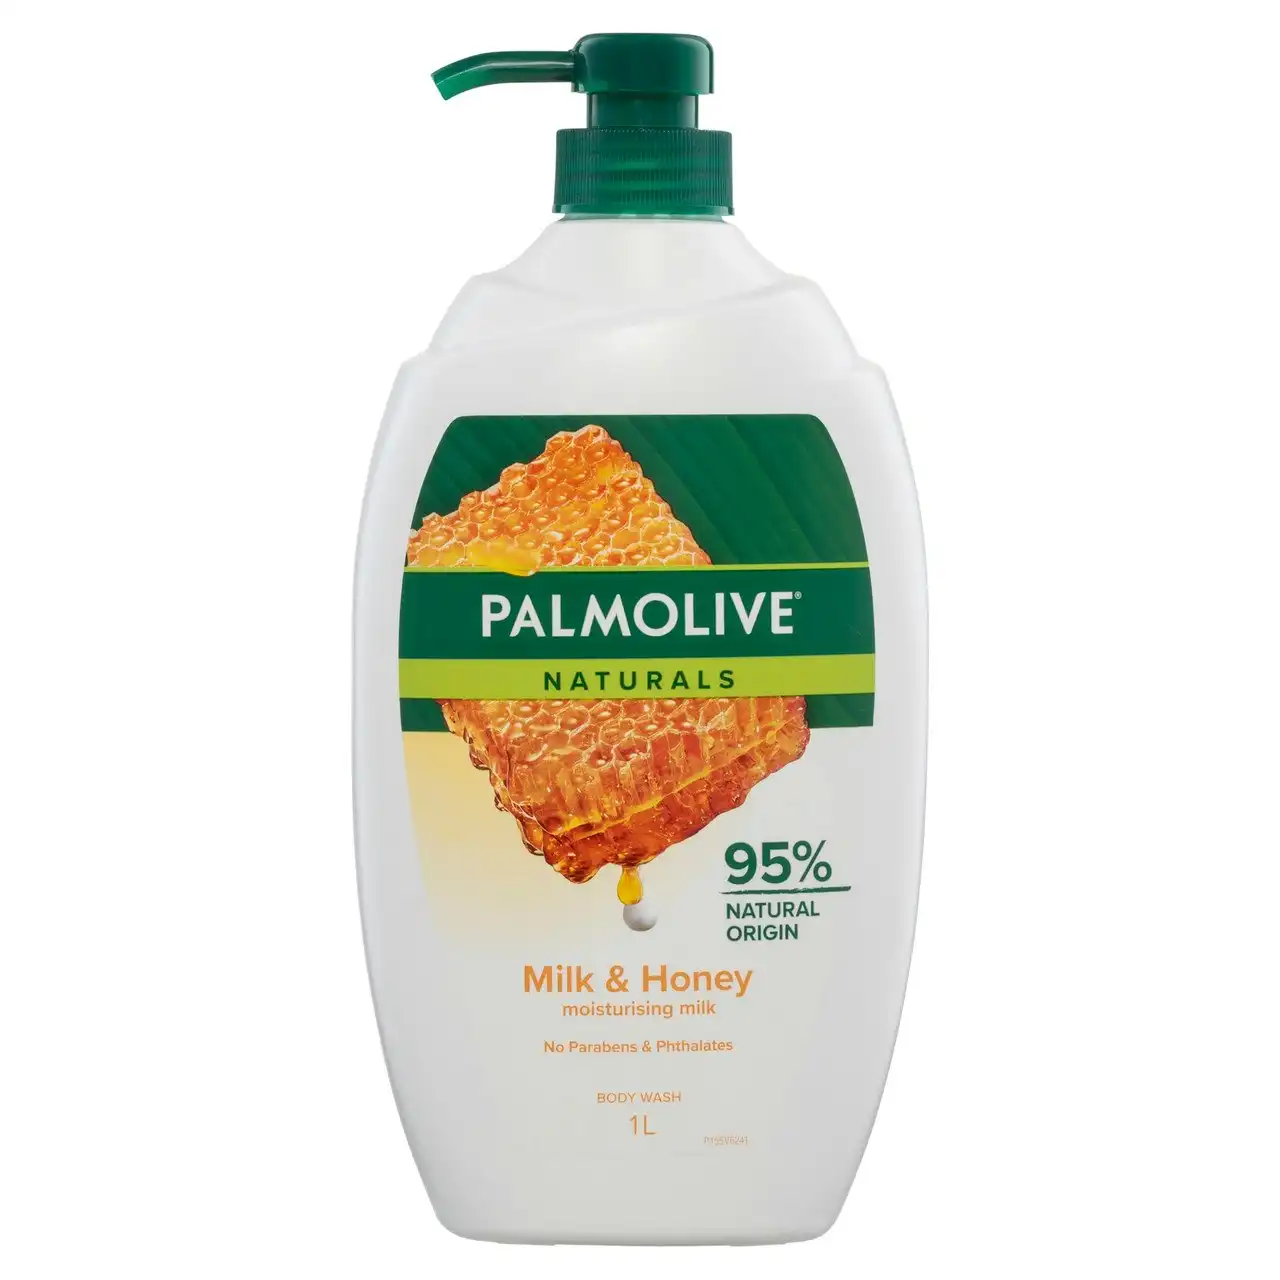 Palmolive Naturals Body Wash, 1L, Milk and Honey, with Moisturising Milk, No Parabens Phthalates or Alcohol